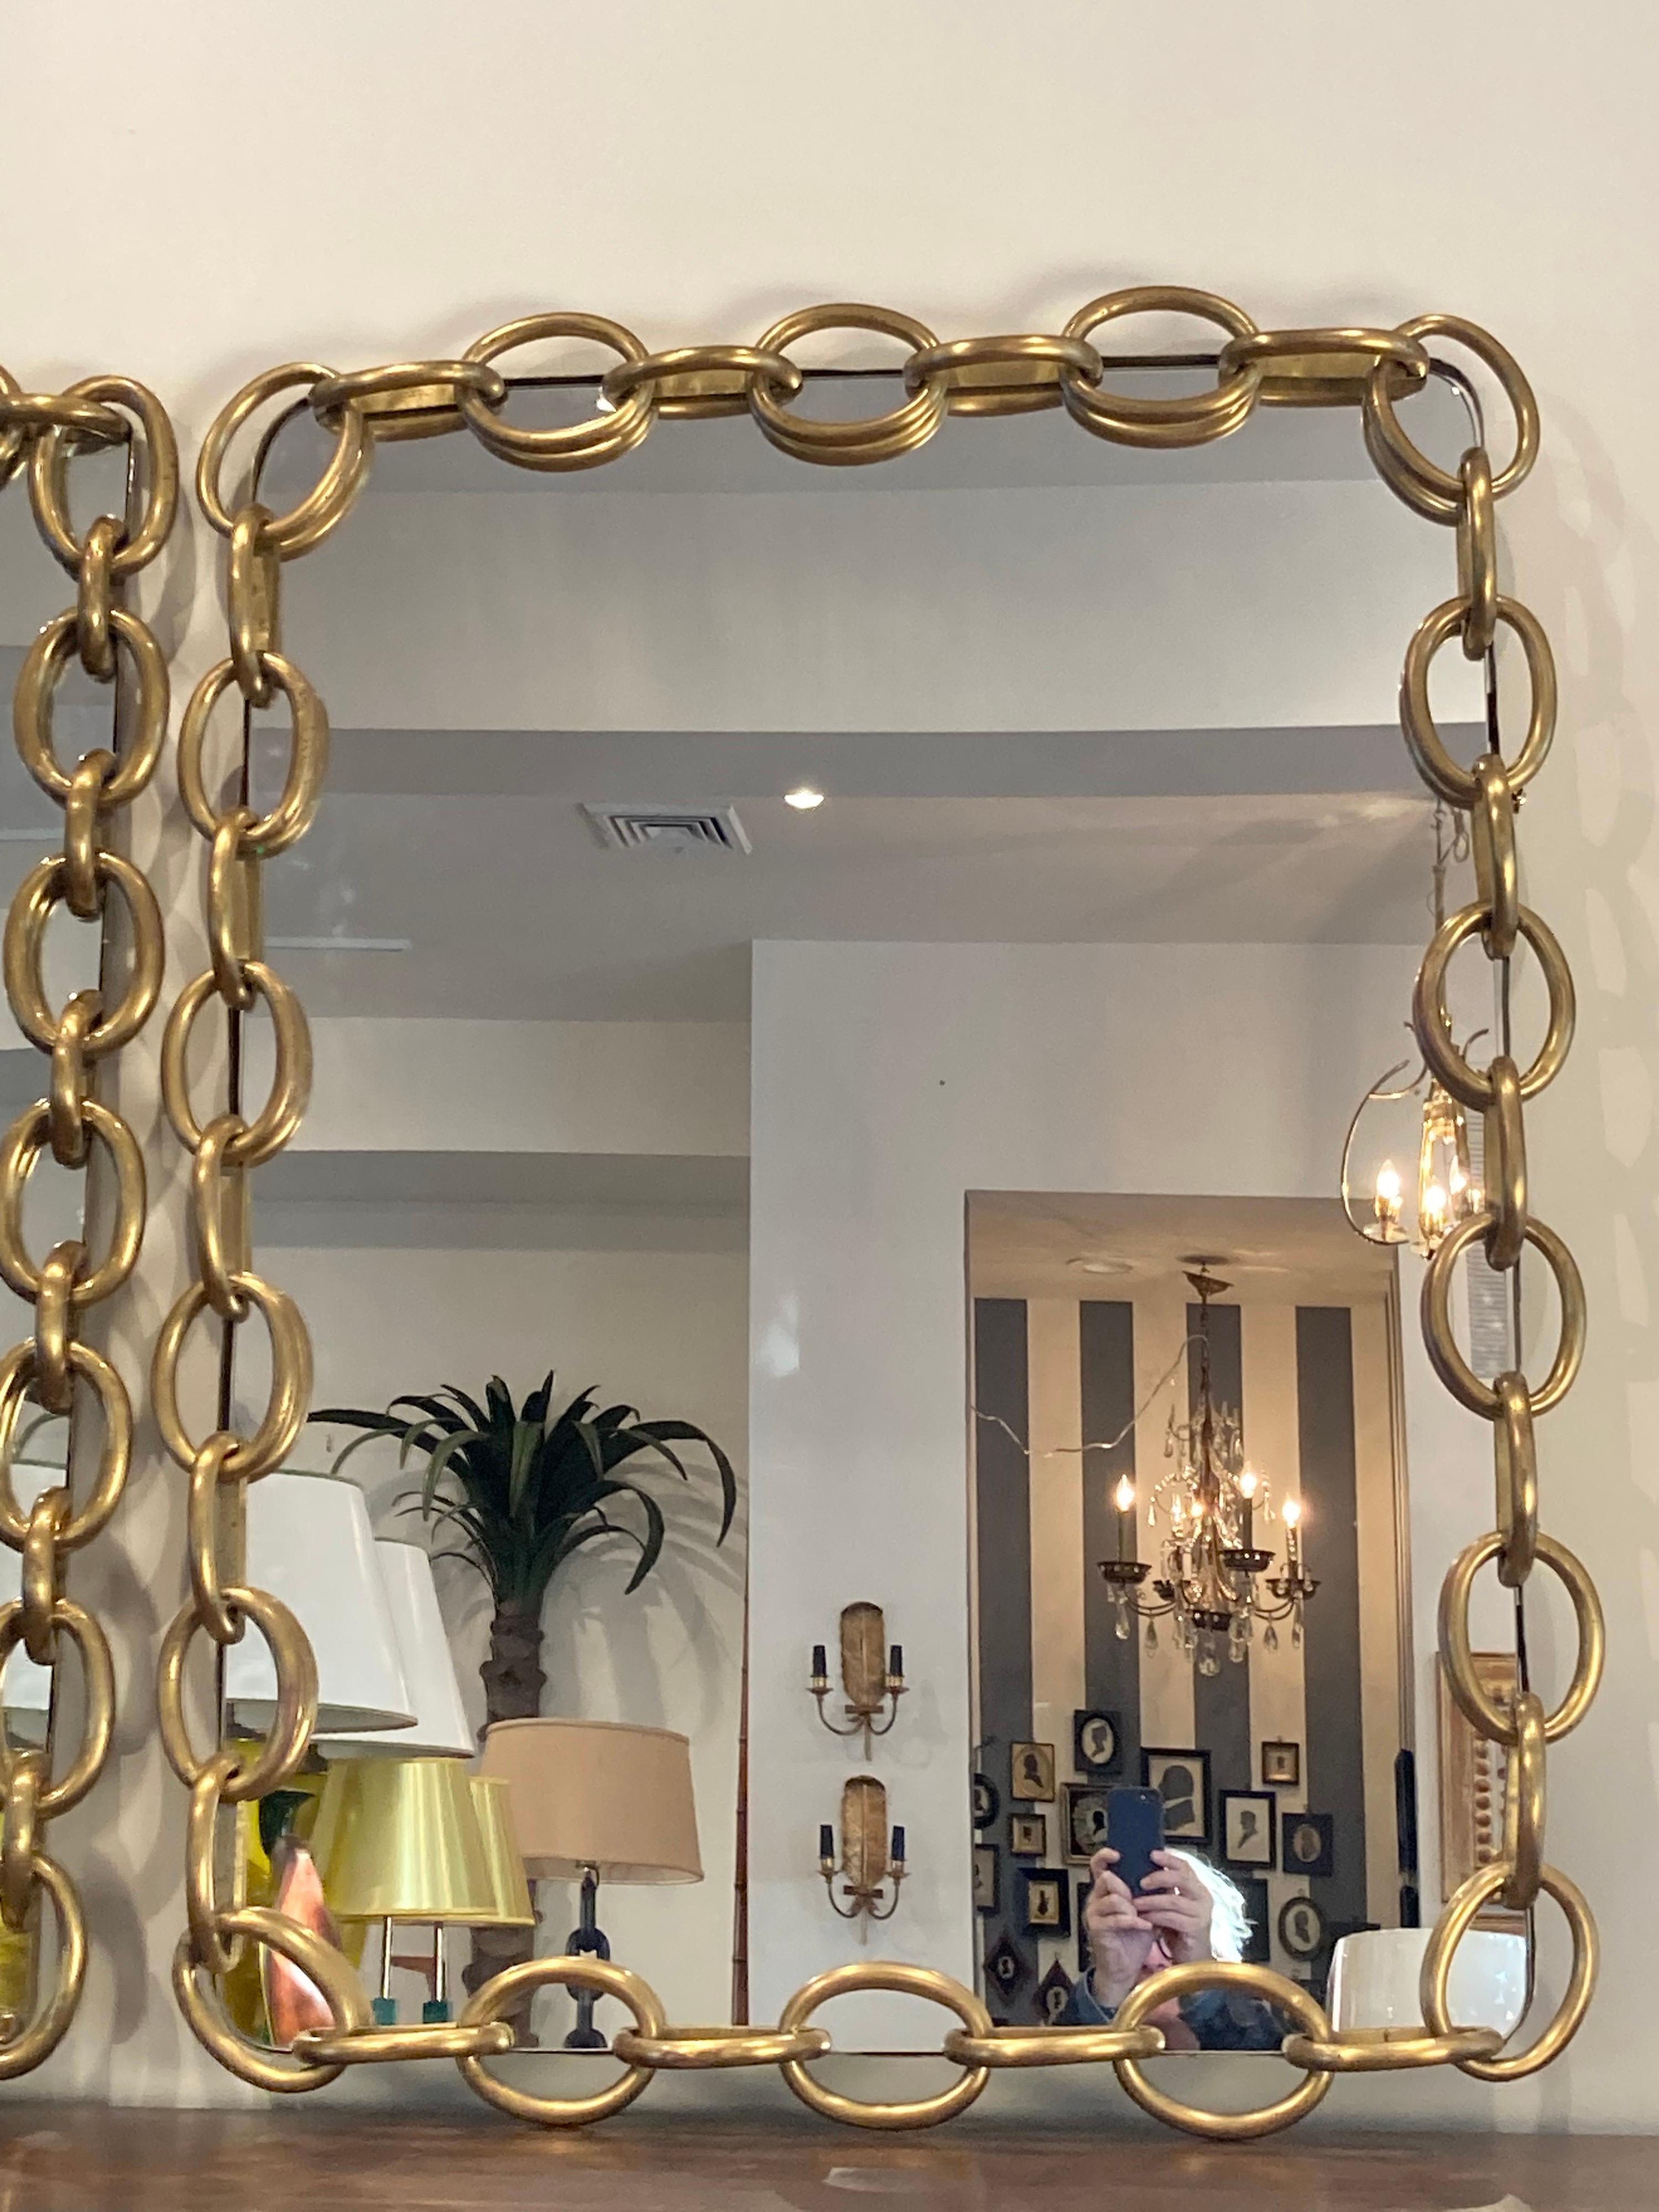 Fabulous pair of brass chain link framed mirrors.... sold separately or together.... so exceptional, like jewelry.... they are not exactly the same but very close cousins.... a rare find!